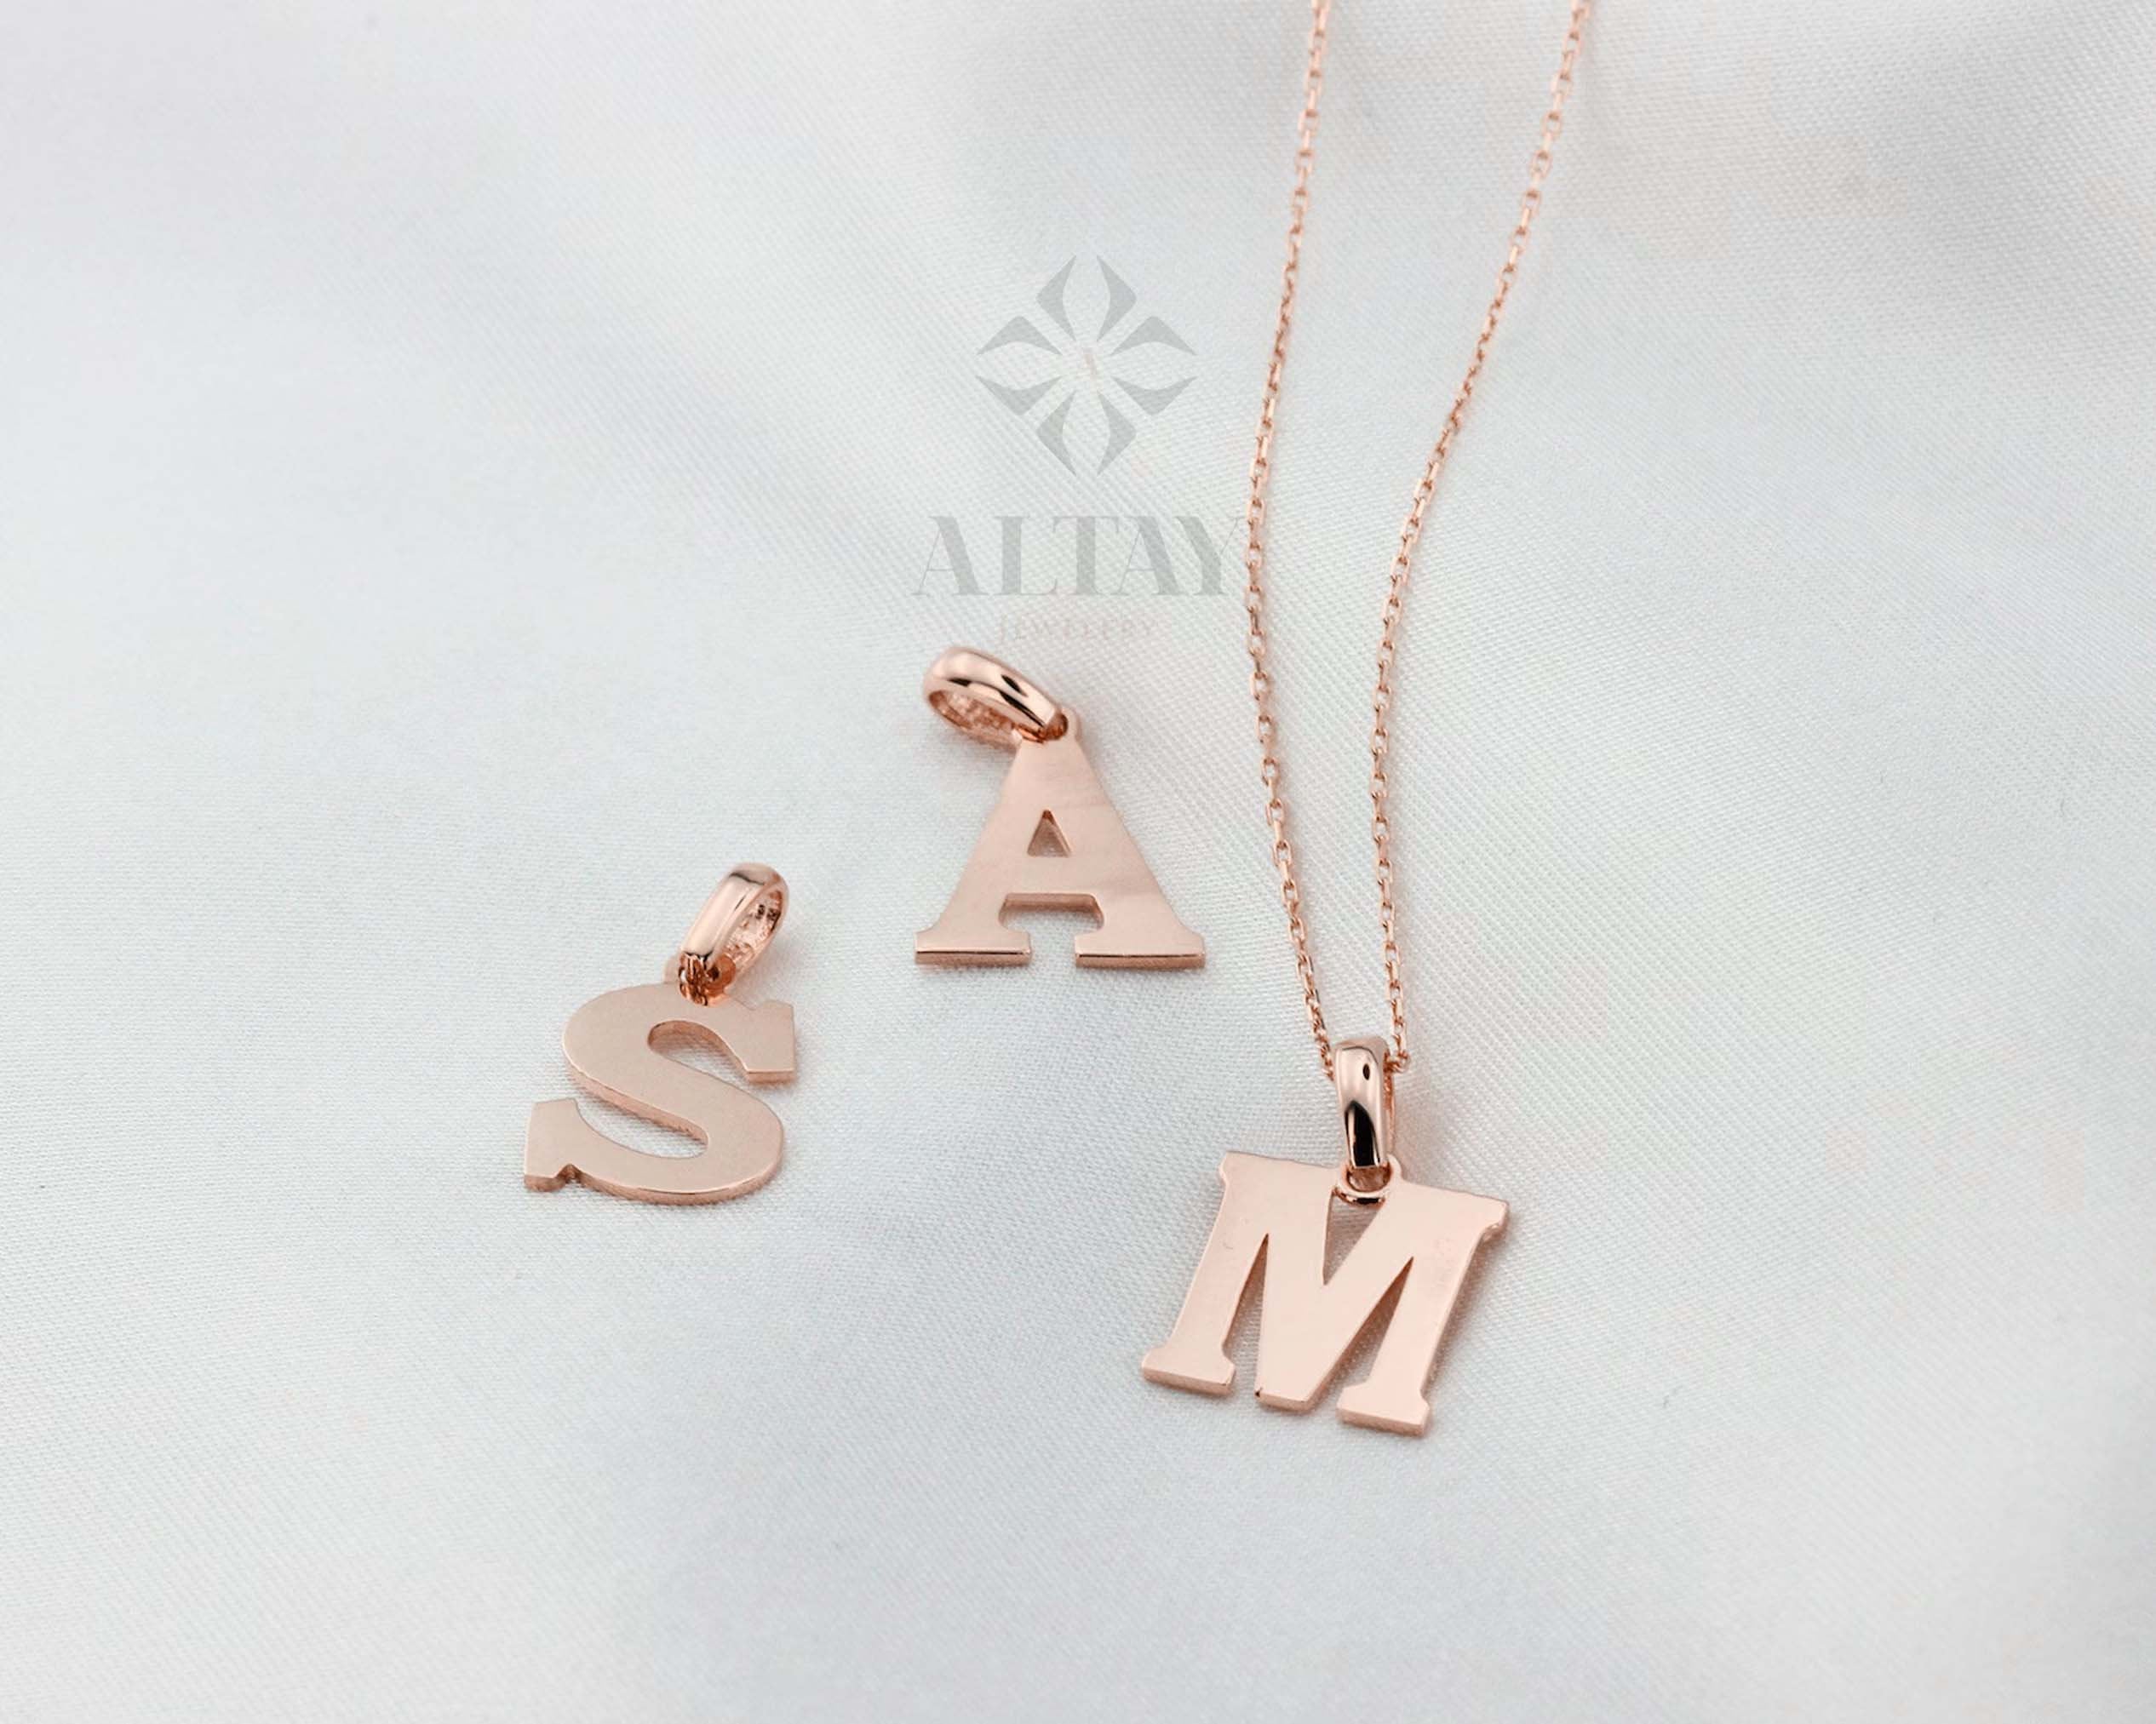 14K Gold Initial Necklace, Dainty Initial Pendant, Letter Pendant Choker, Personalized Single Letter, Personalized Jewelry, Wife Gifts